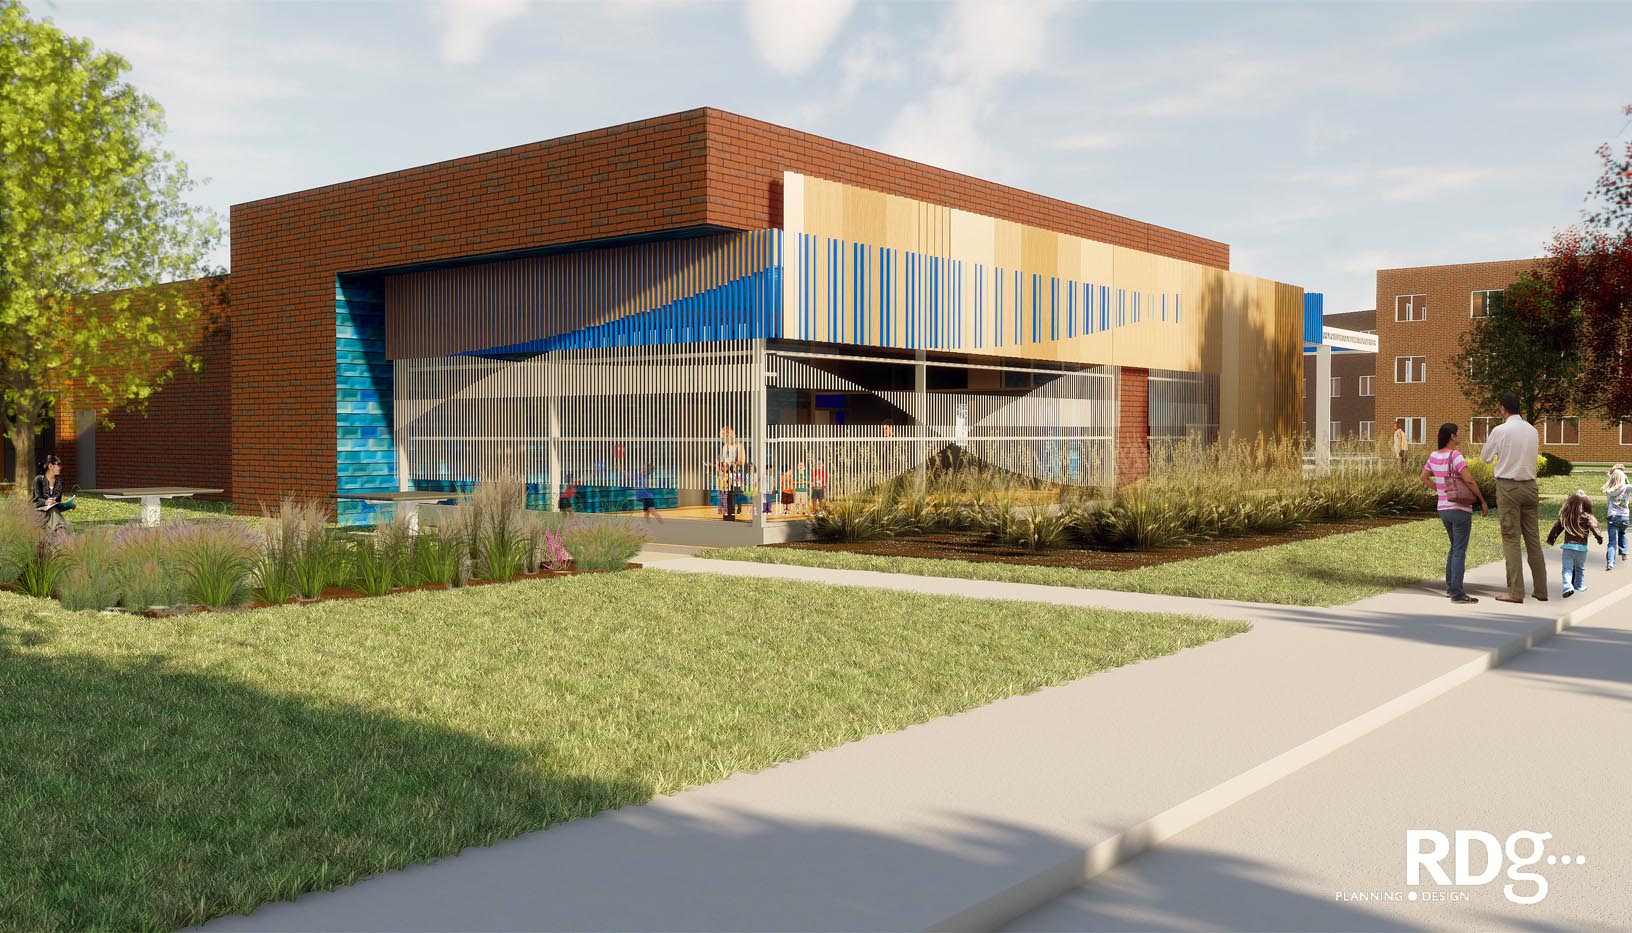 The LaVonne Kopecky Plambeck Early Childhood Education Center at the University of Nebraska at Kearney is the first academic footprint on UNK’s University Village development. It will become a model for early childhood education, early childhood educator preparation and research.